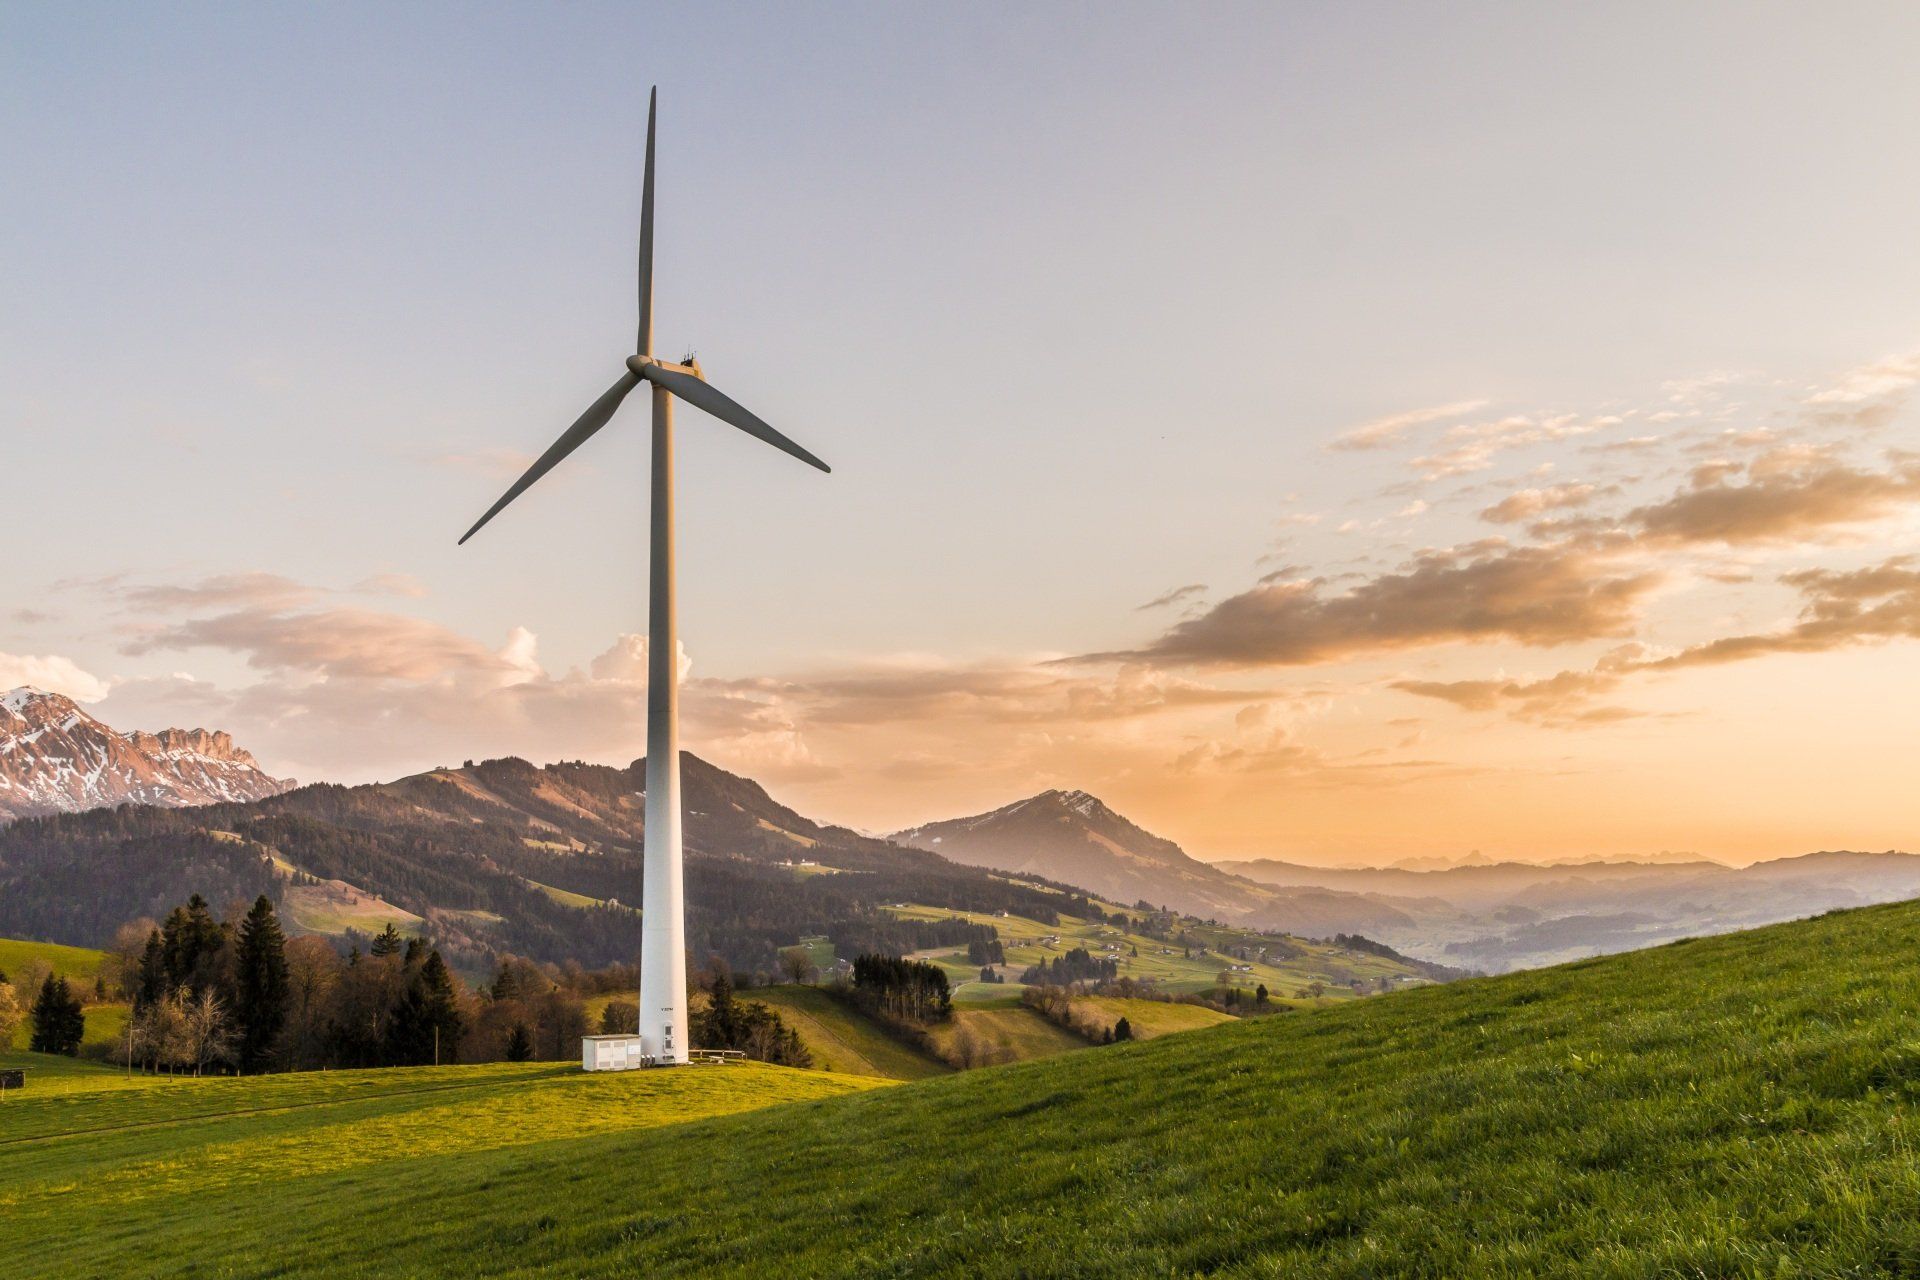 a wind turbine on top of a grassy hill with mountains in the background